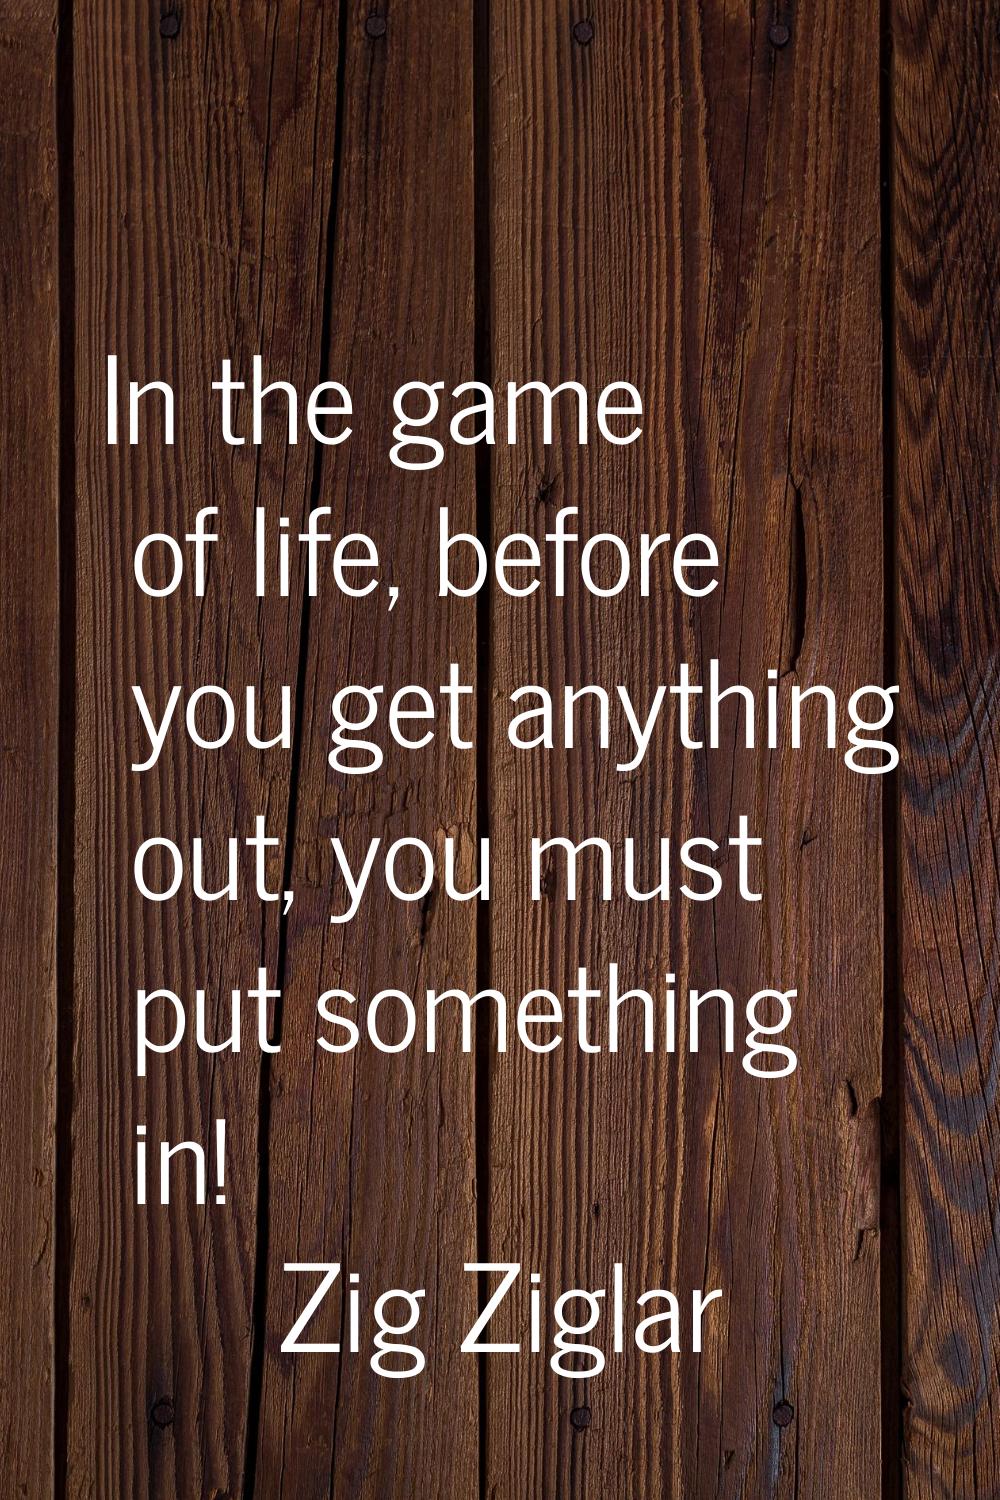 In the game of life, before you get anything out, you must put something in!